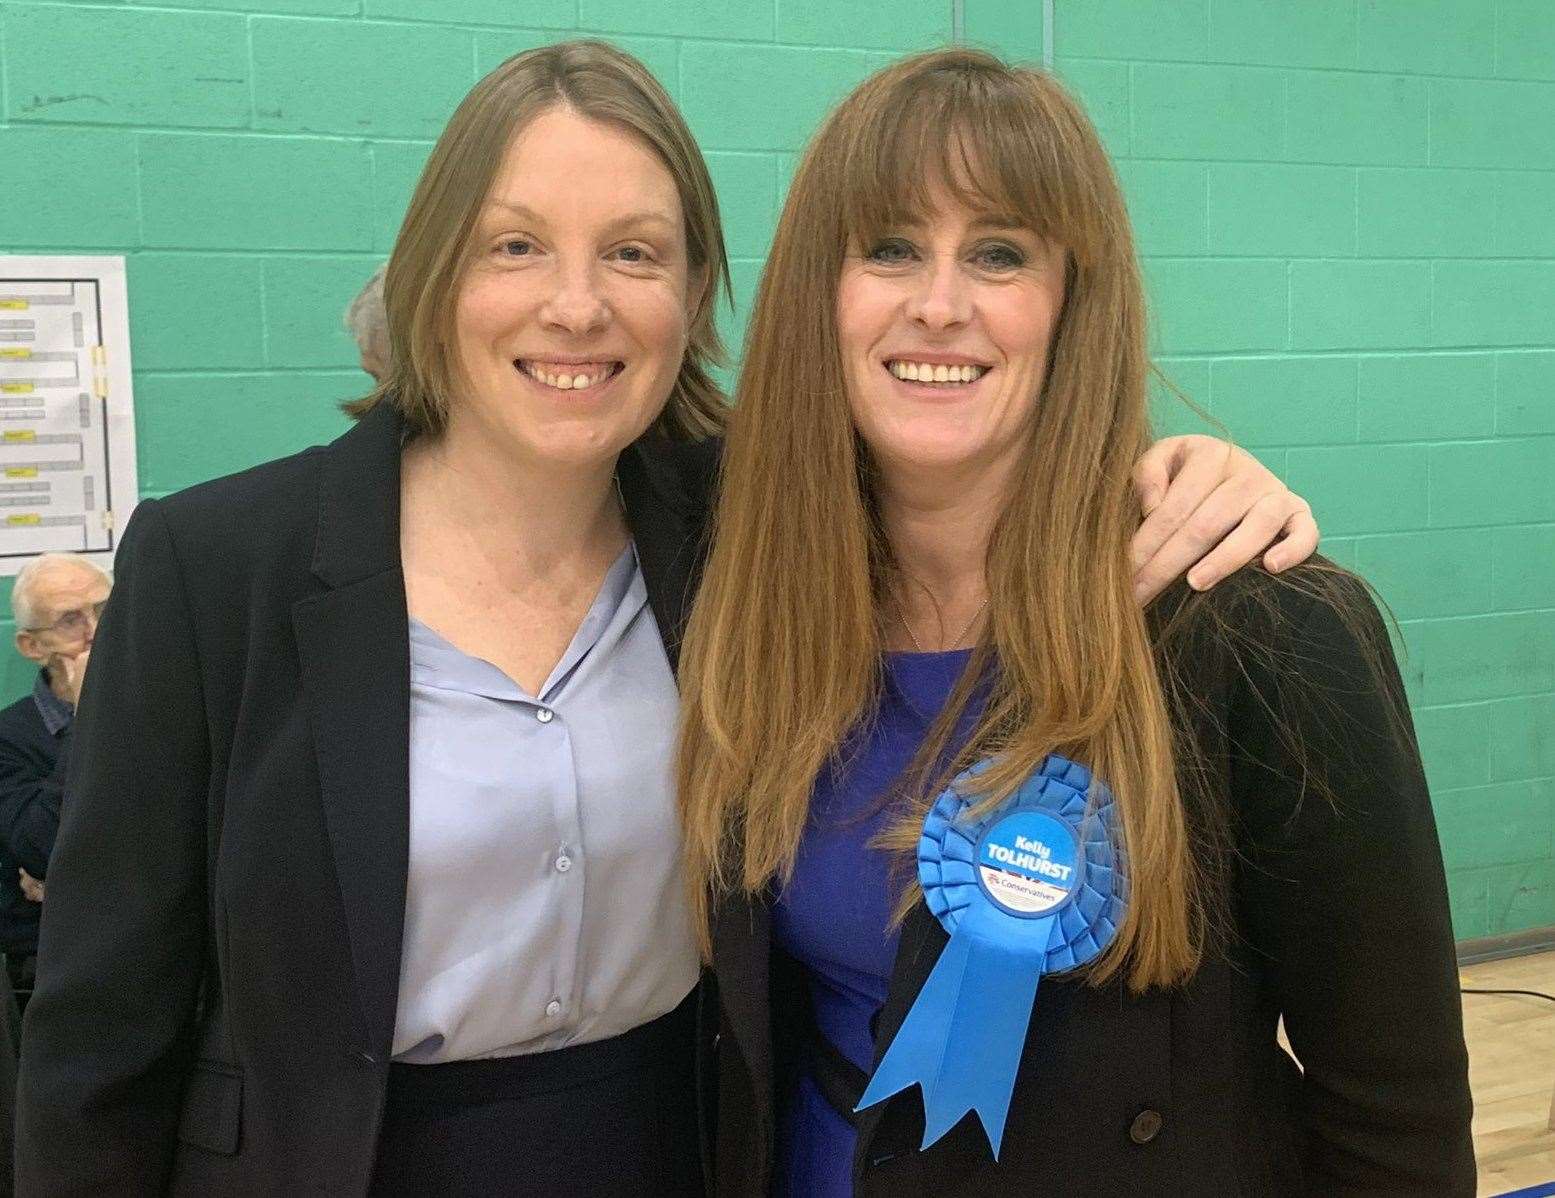 Tracey Crouch and Kelly Tolhurst have been re-elected